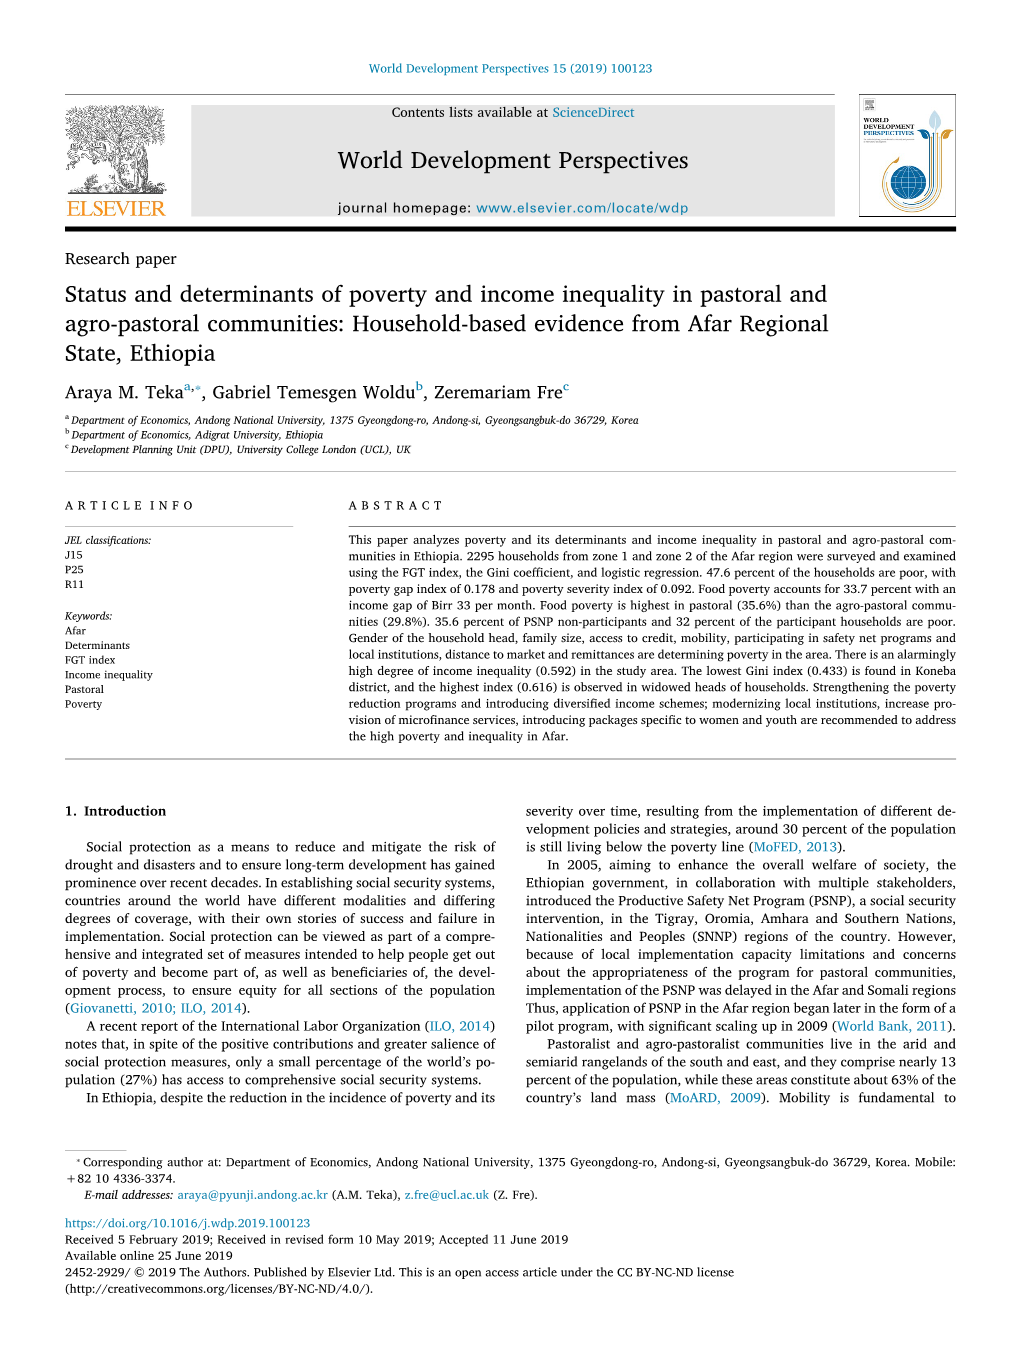 Status and Determinants of Poverty and Income Inequality in Pastoral and Agro-Pastoral Communities Household-Based Evidence